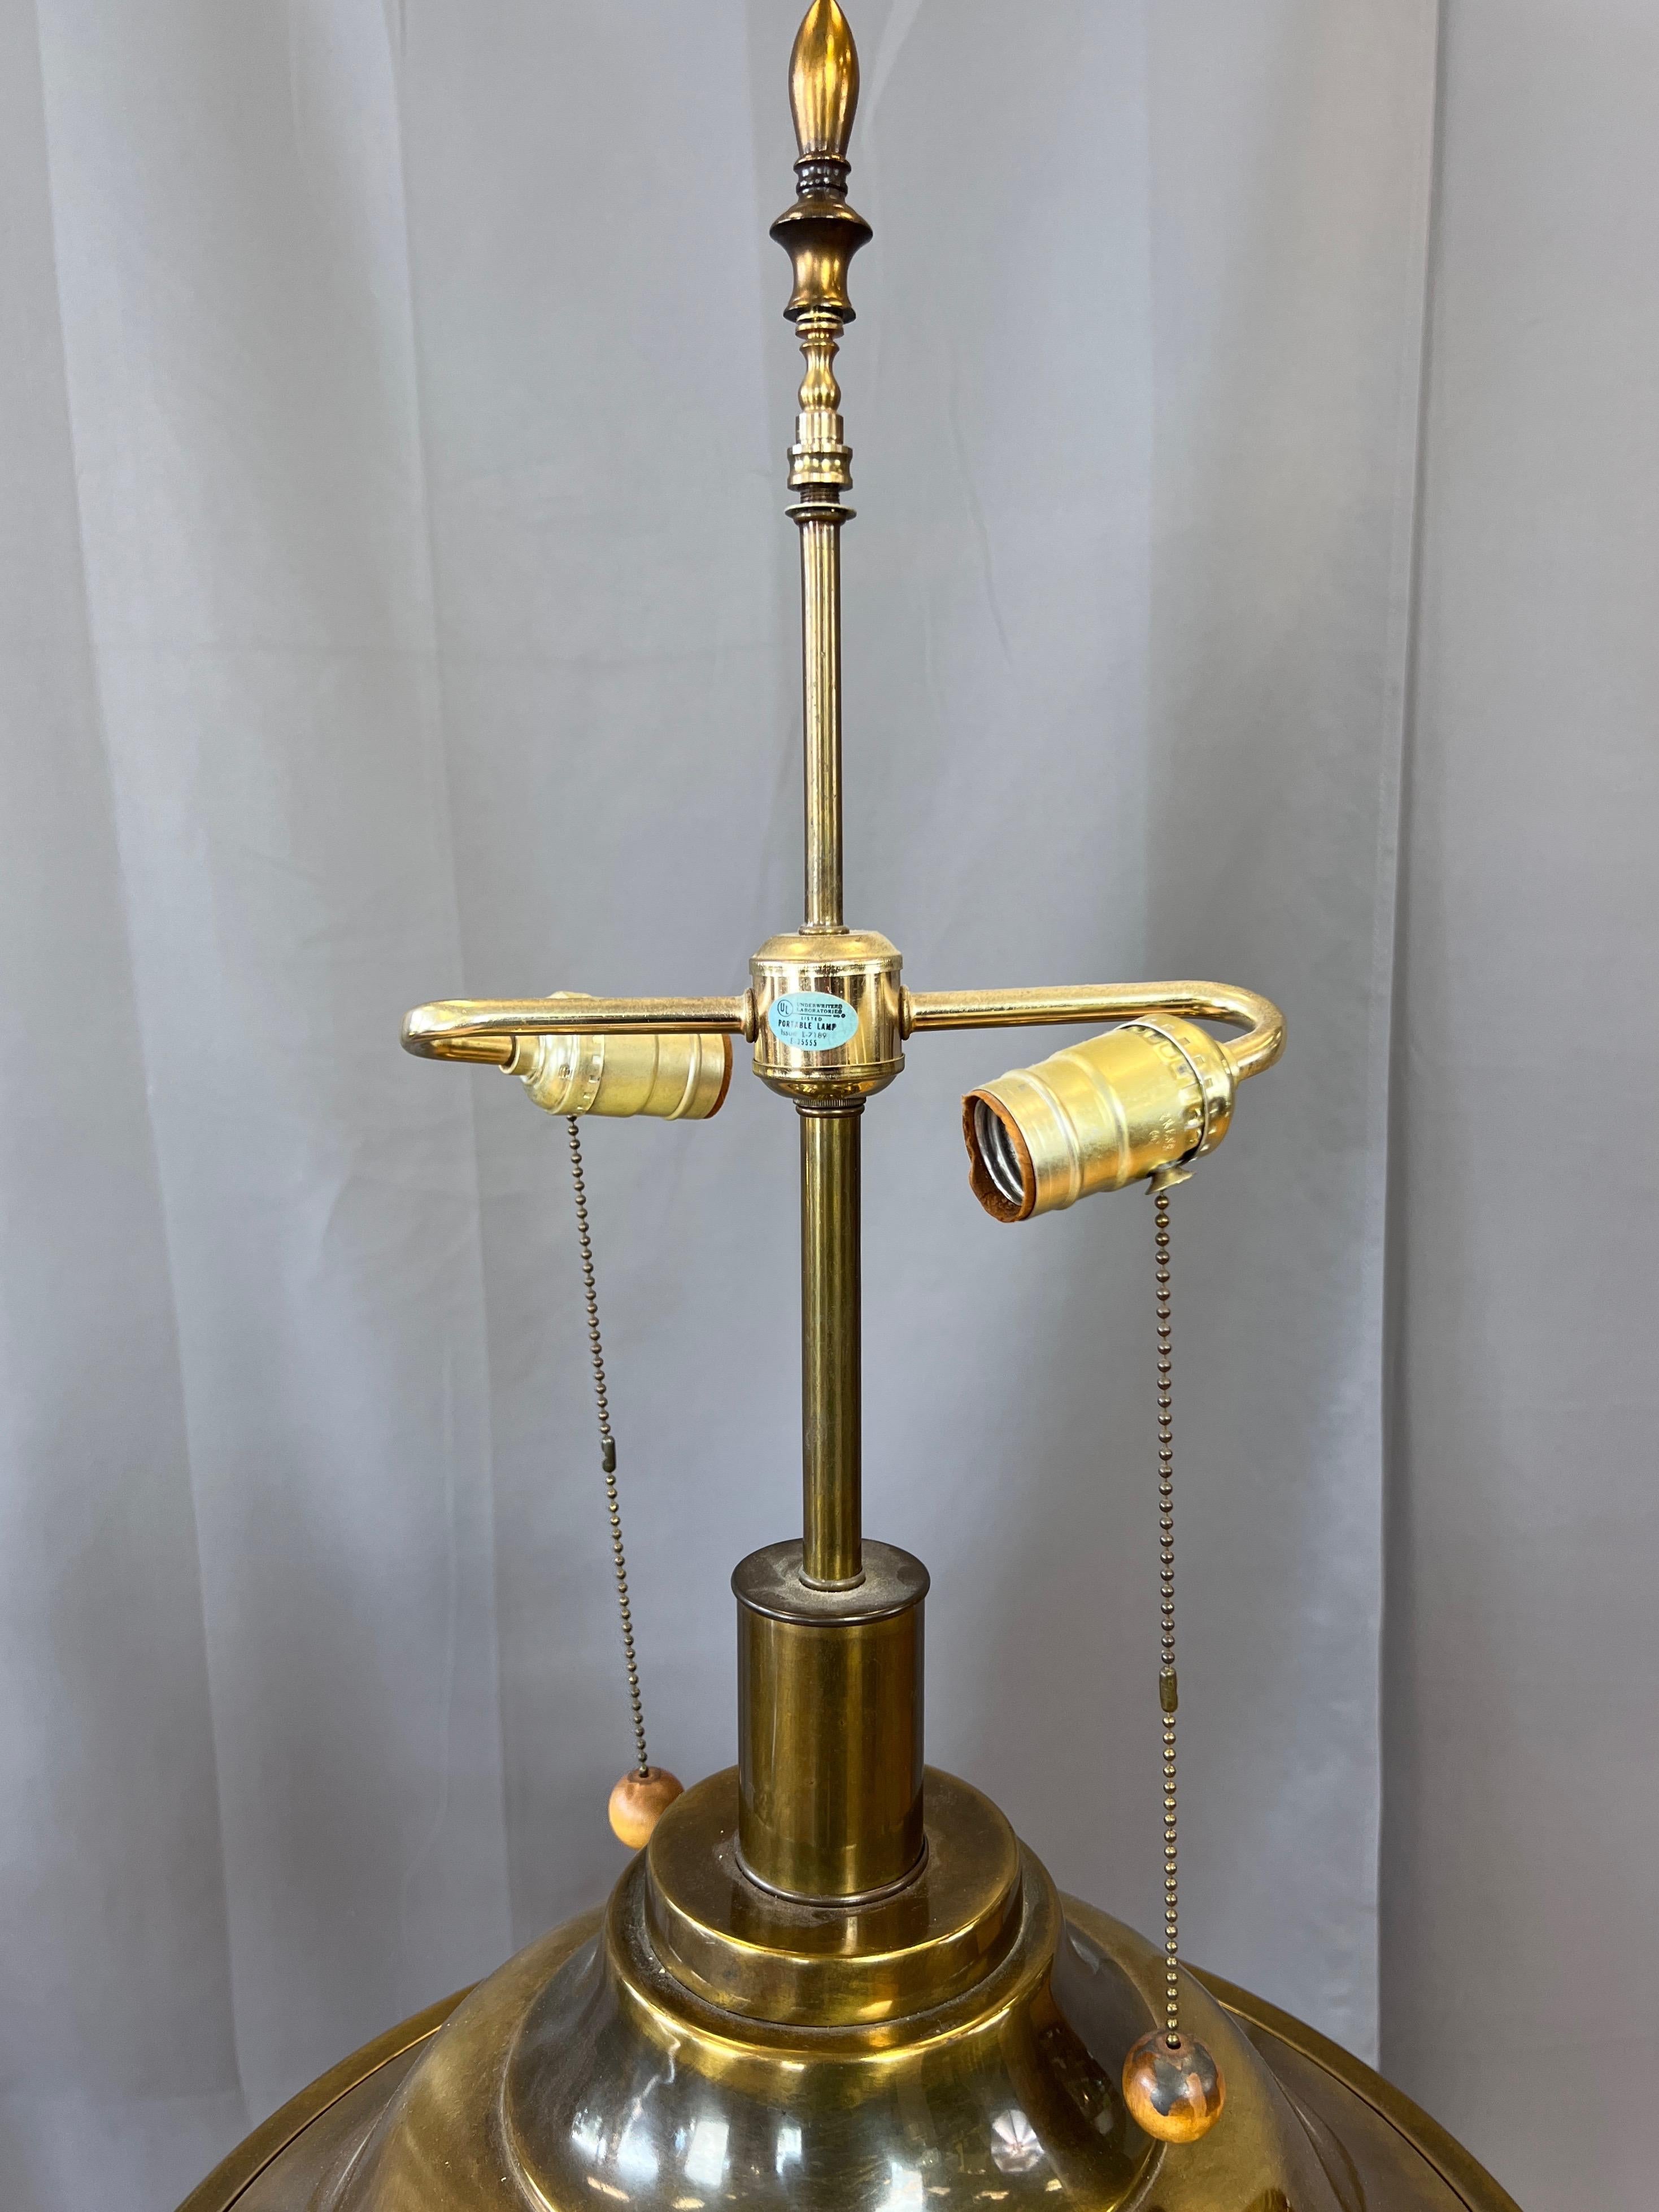 Pair of Monumental Marbro-Style Antiqued Brass Table Lamps with Shades, 1960s For Sale 9